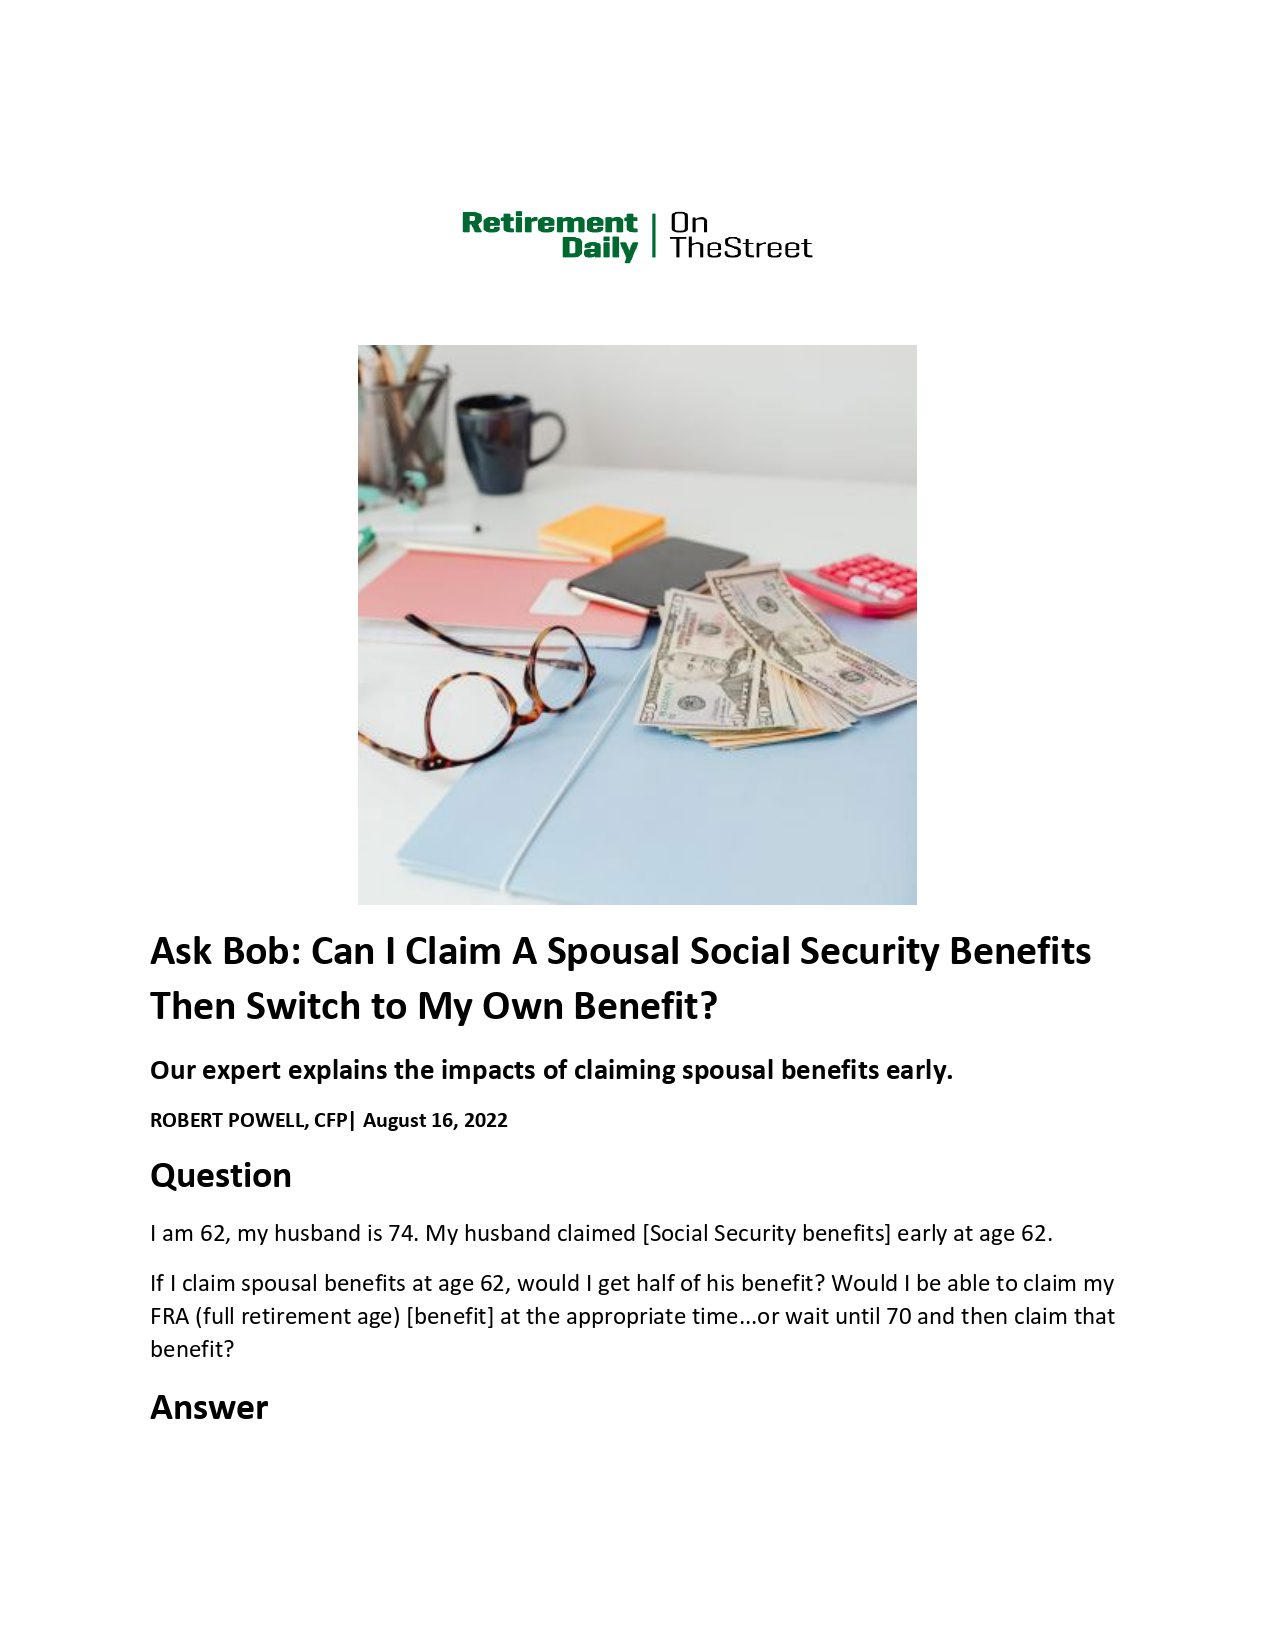 Spousal Social Security Benefits Switched to My Own